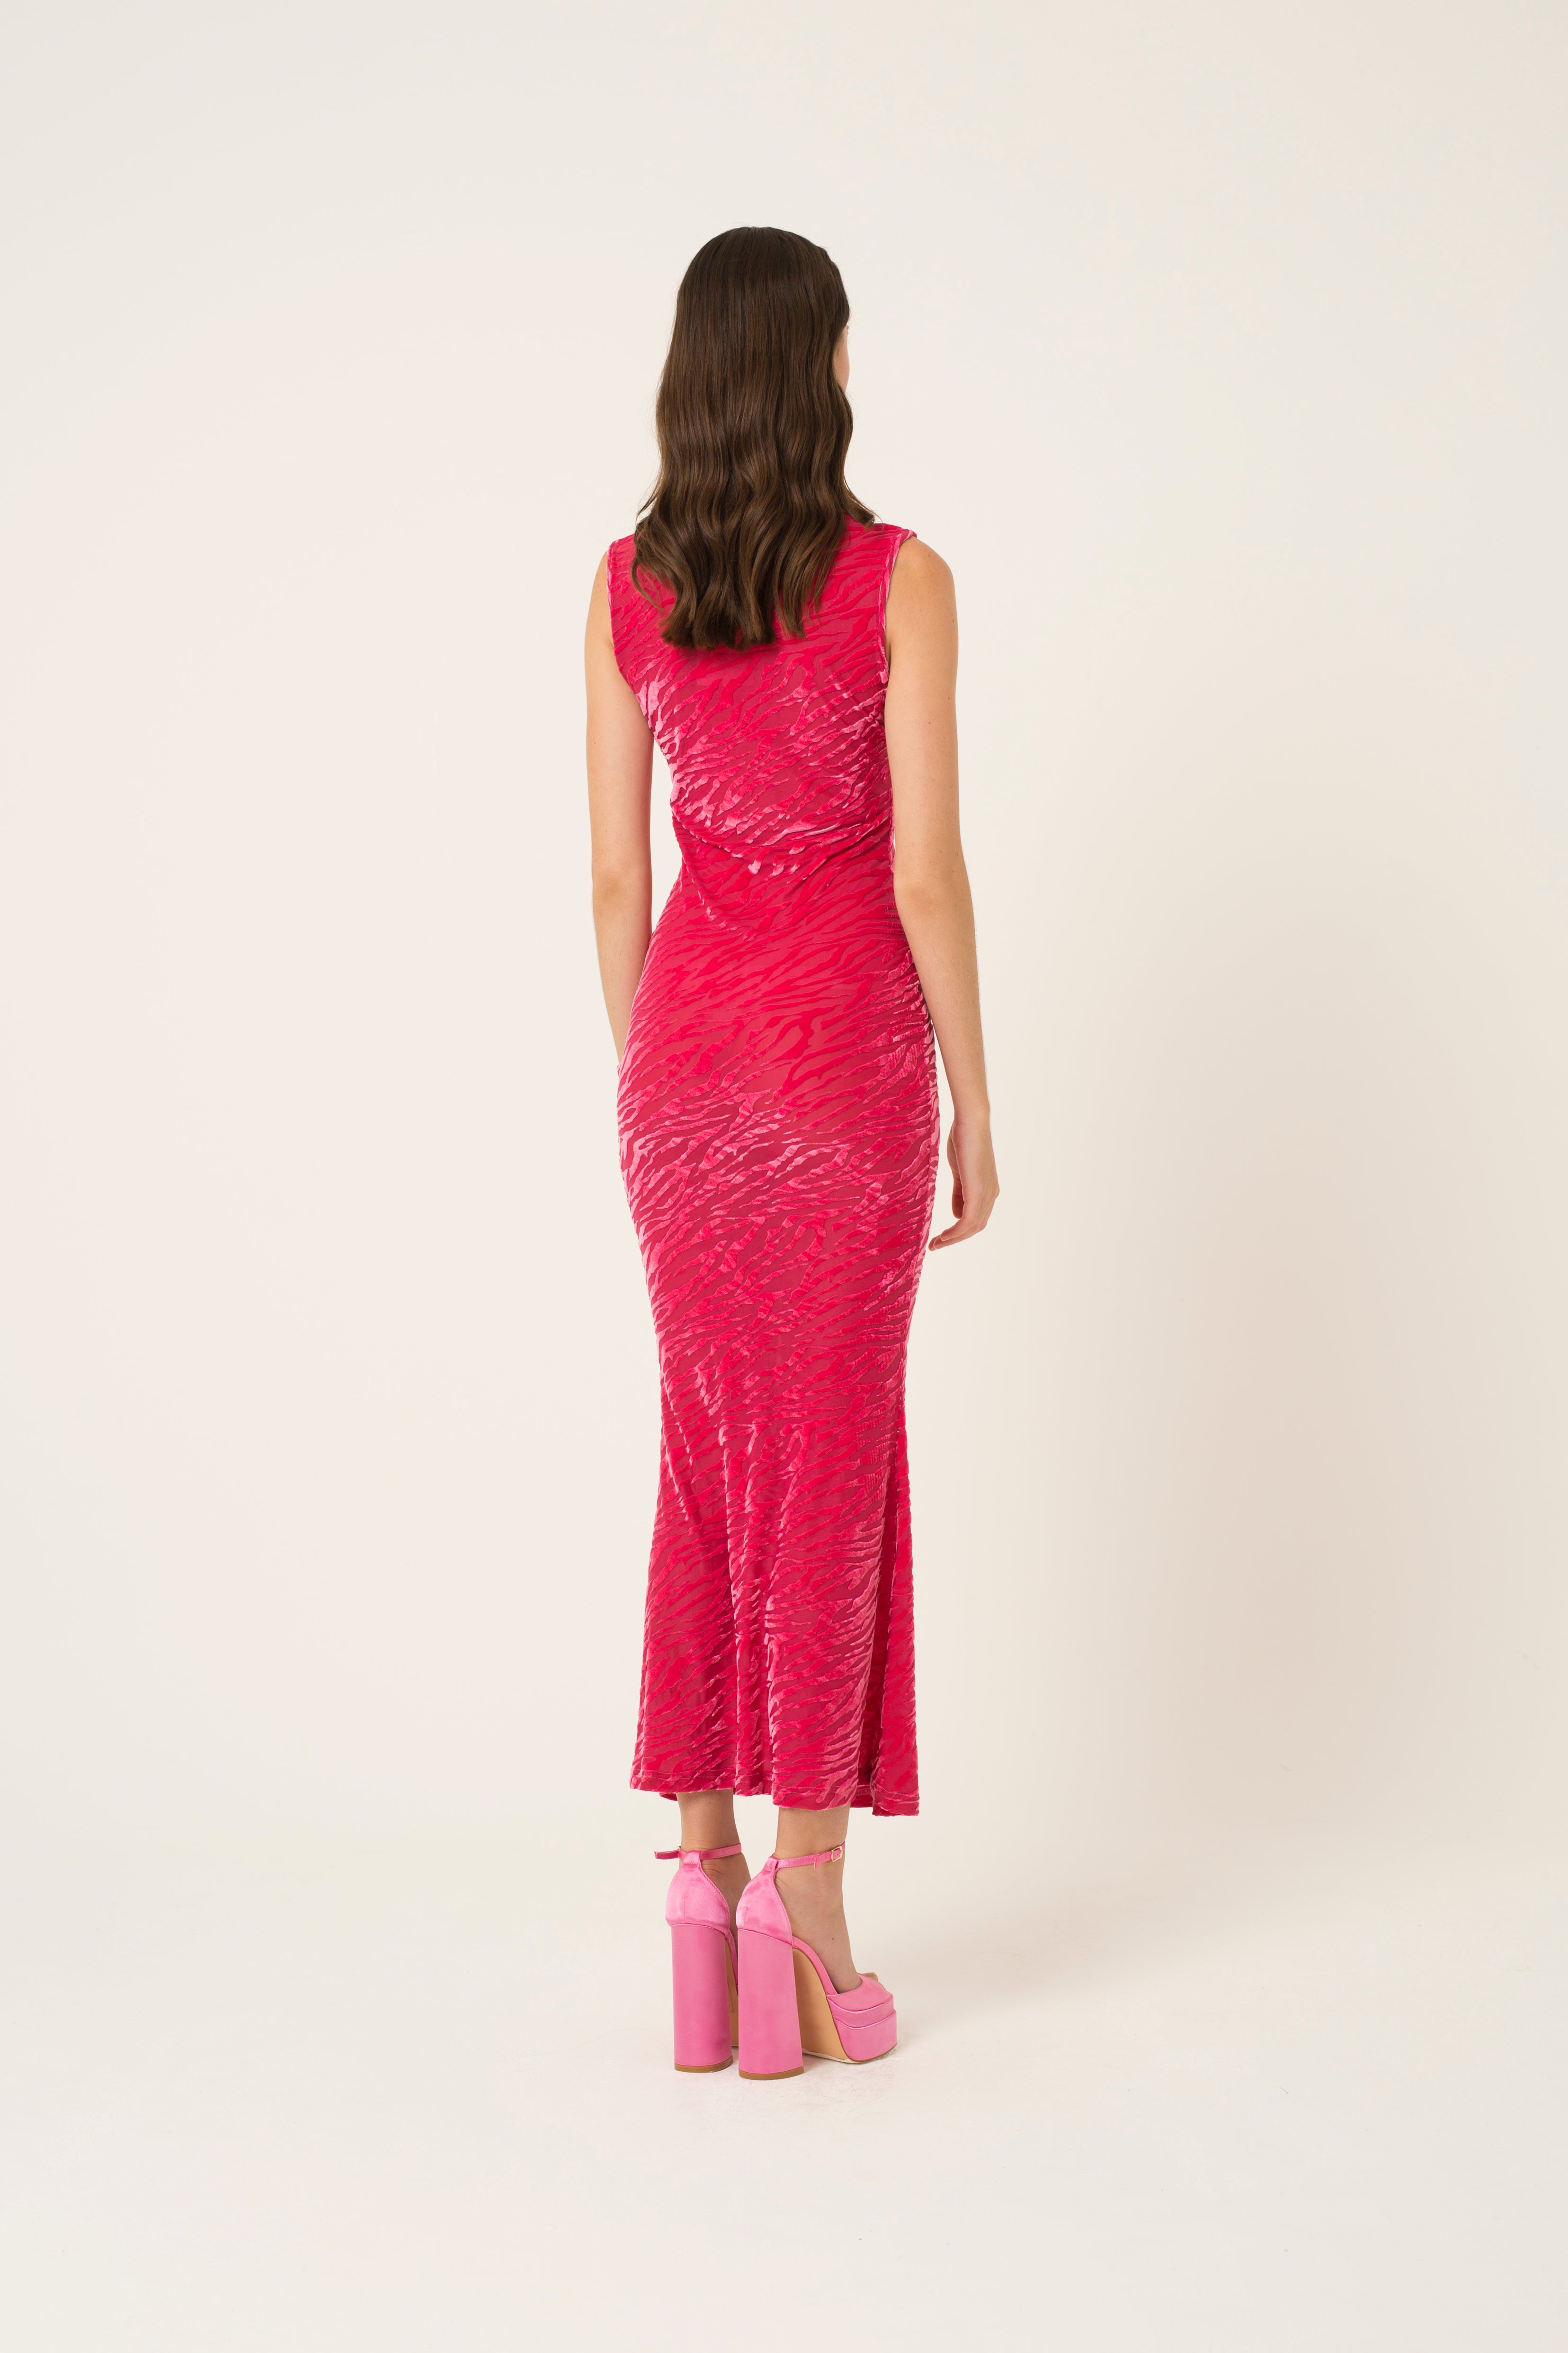 Lana Pink Fitted High Neck Dress